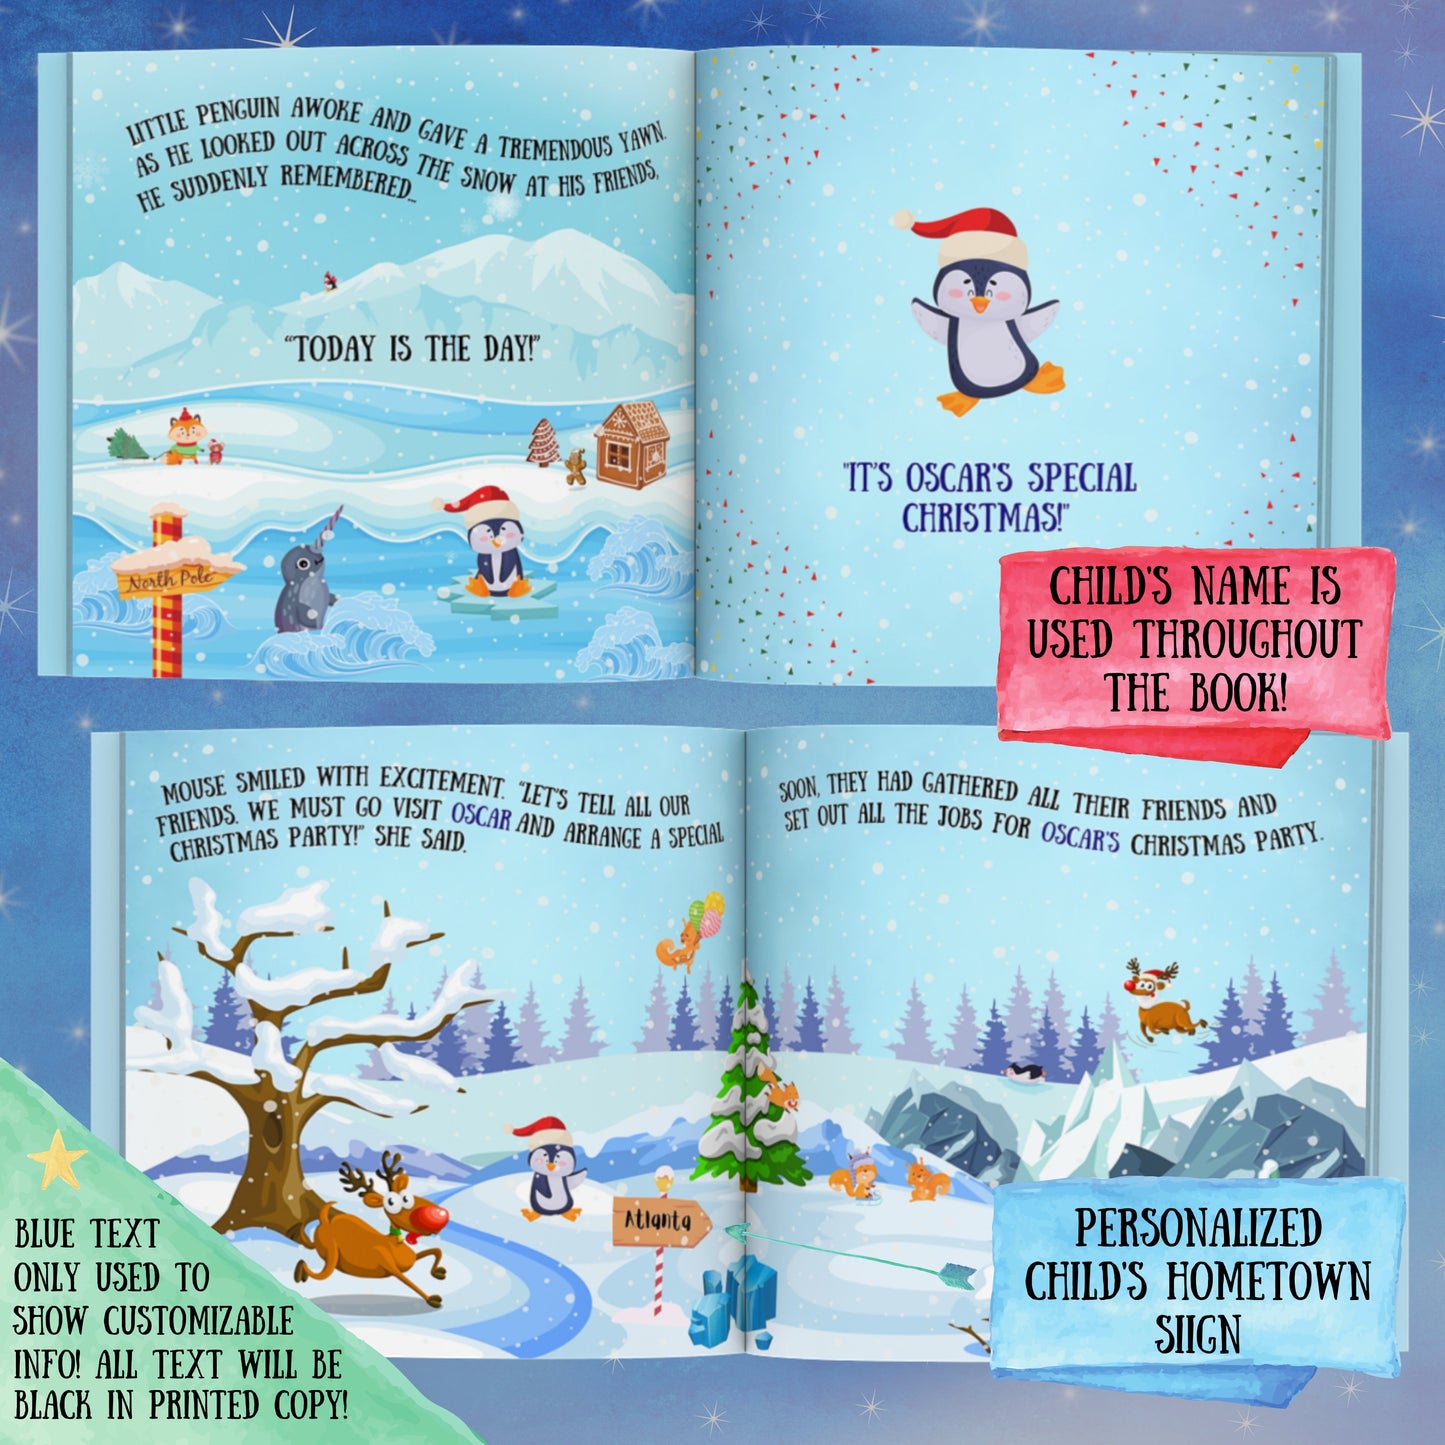 Personalized Christmas Book with photo and name – My Custom Kids Books